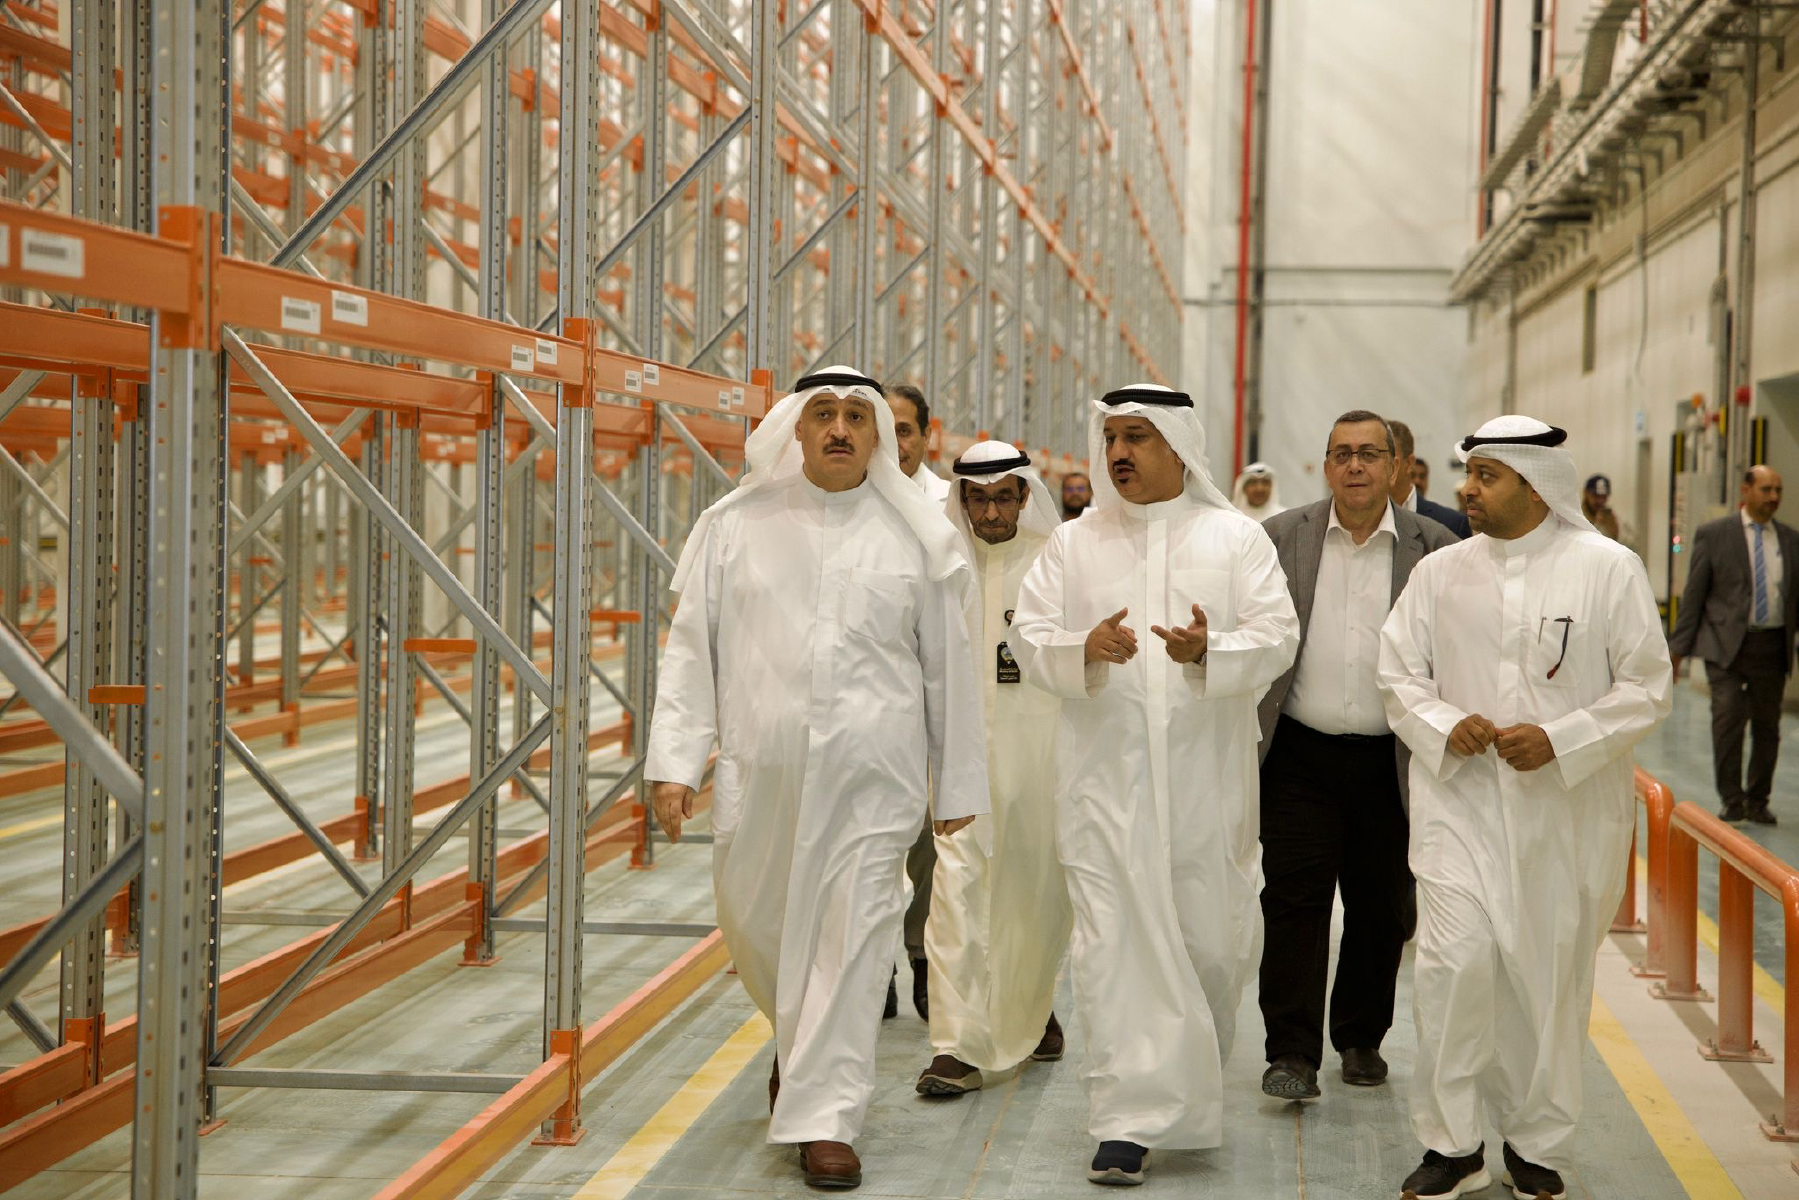 Minister of Health inspects medical supplies warehouses